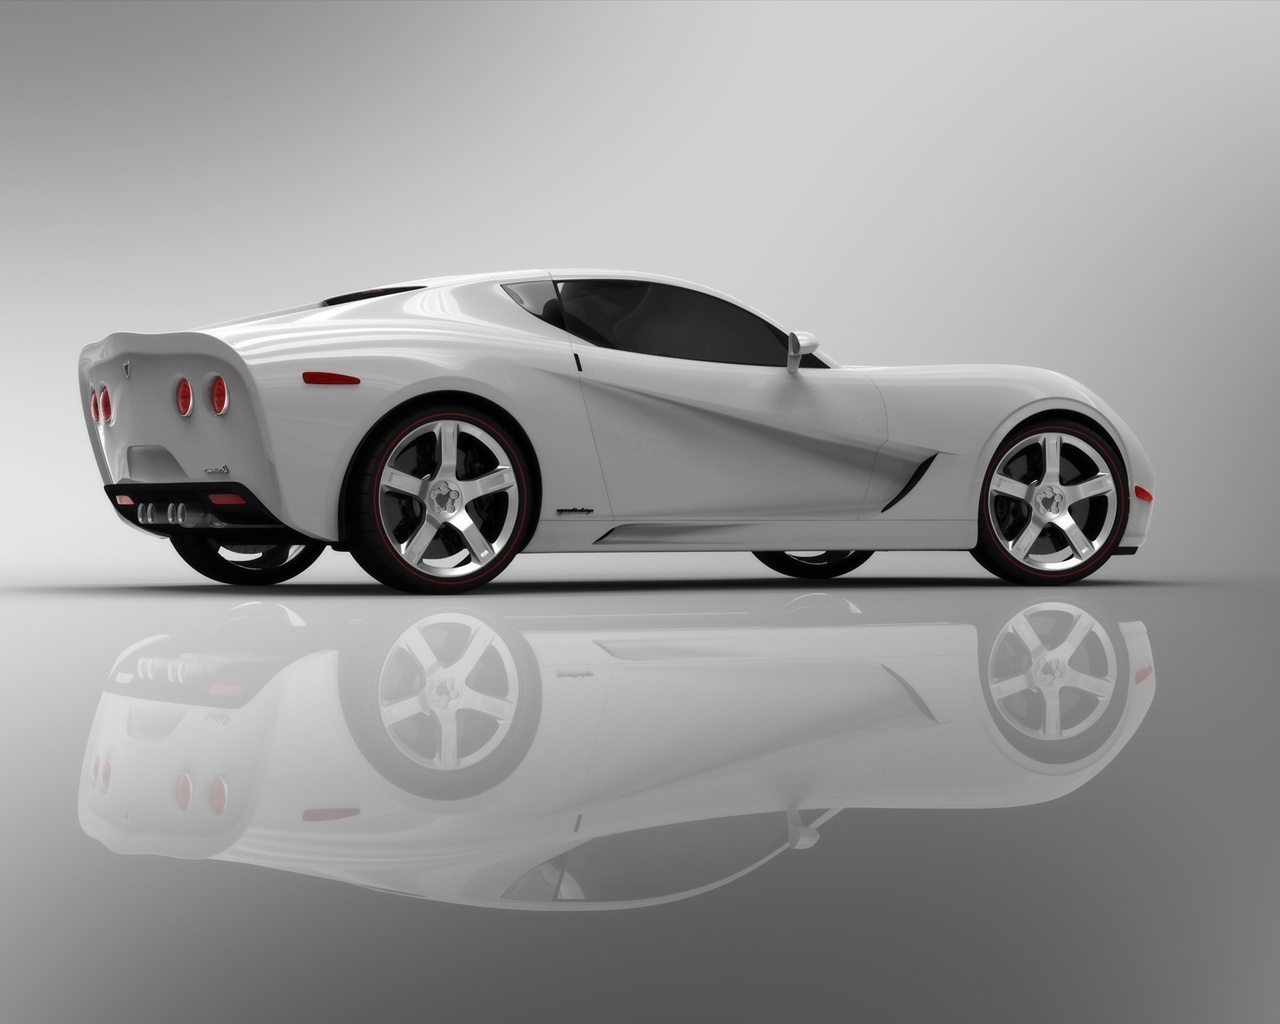 Corvette Z03 2009 White Rear And Side for 1280 x 1024 resolution